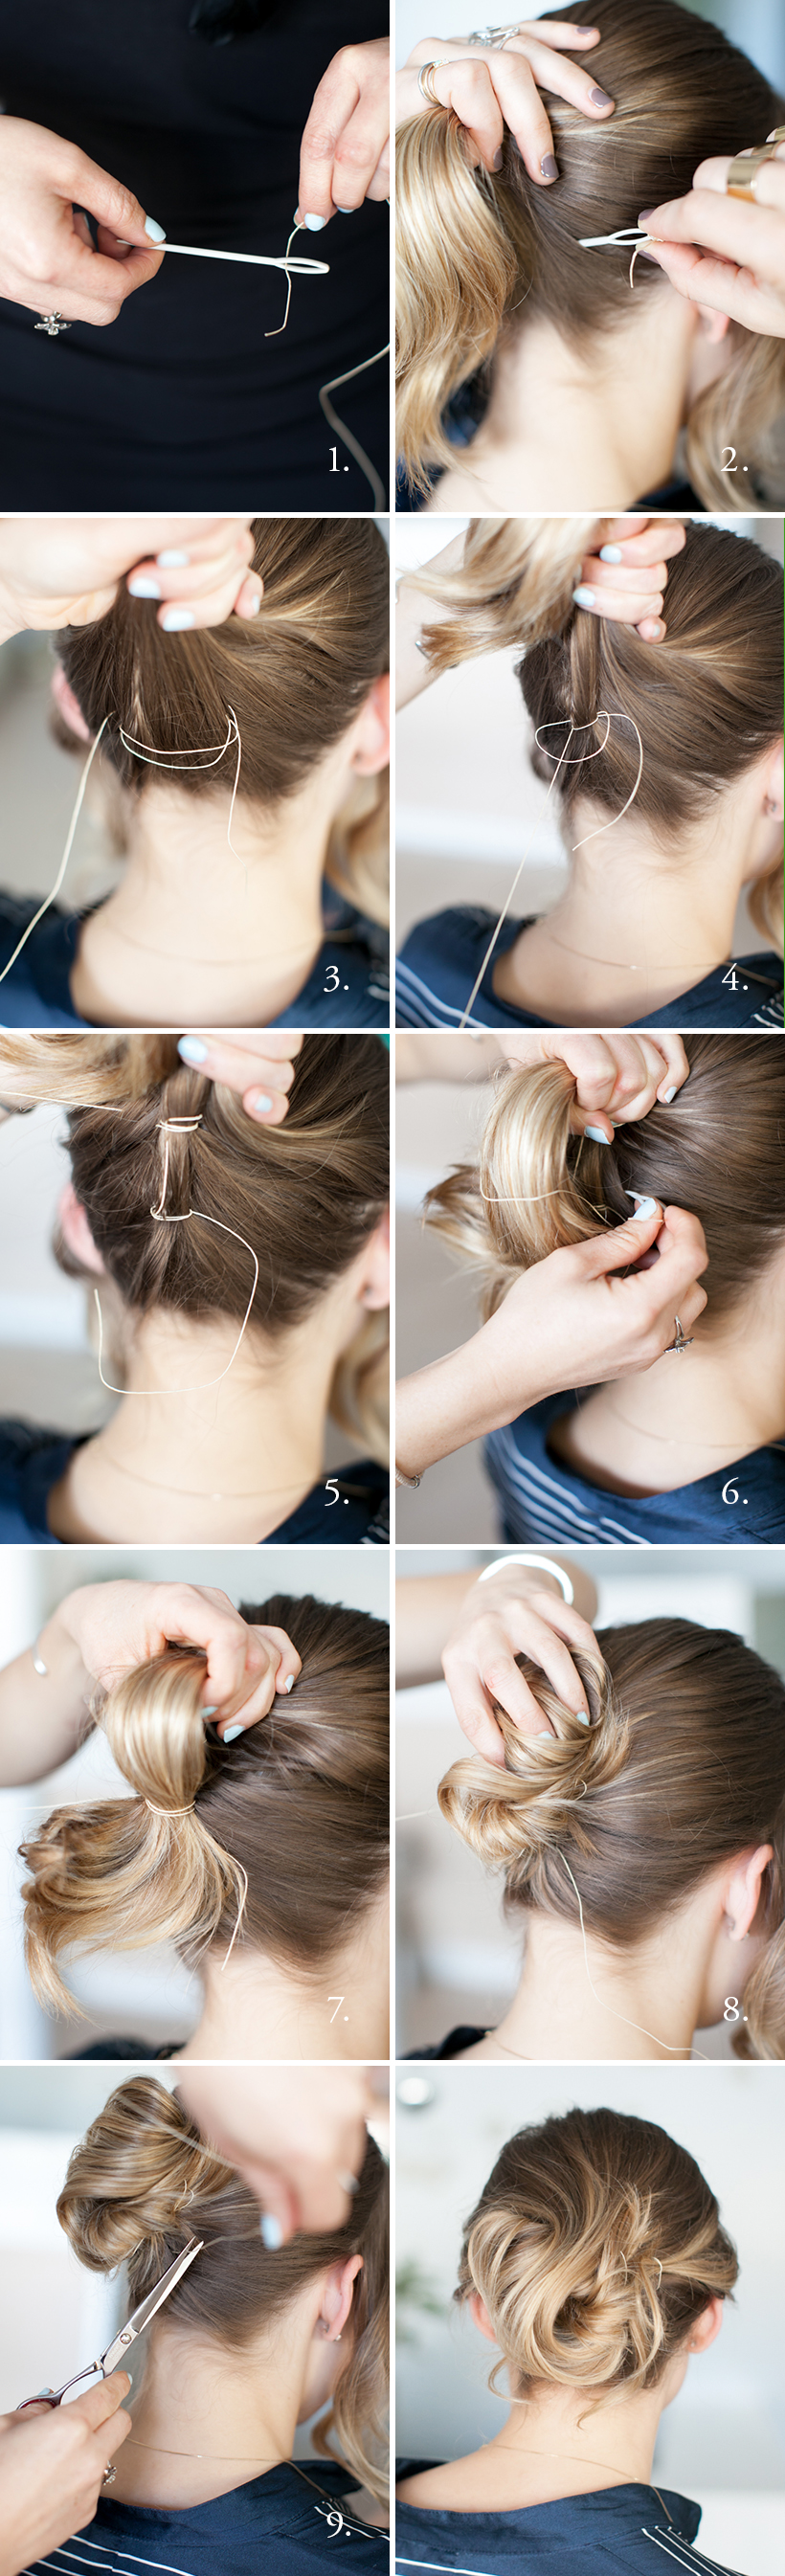 The Sew It Updo